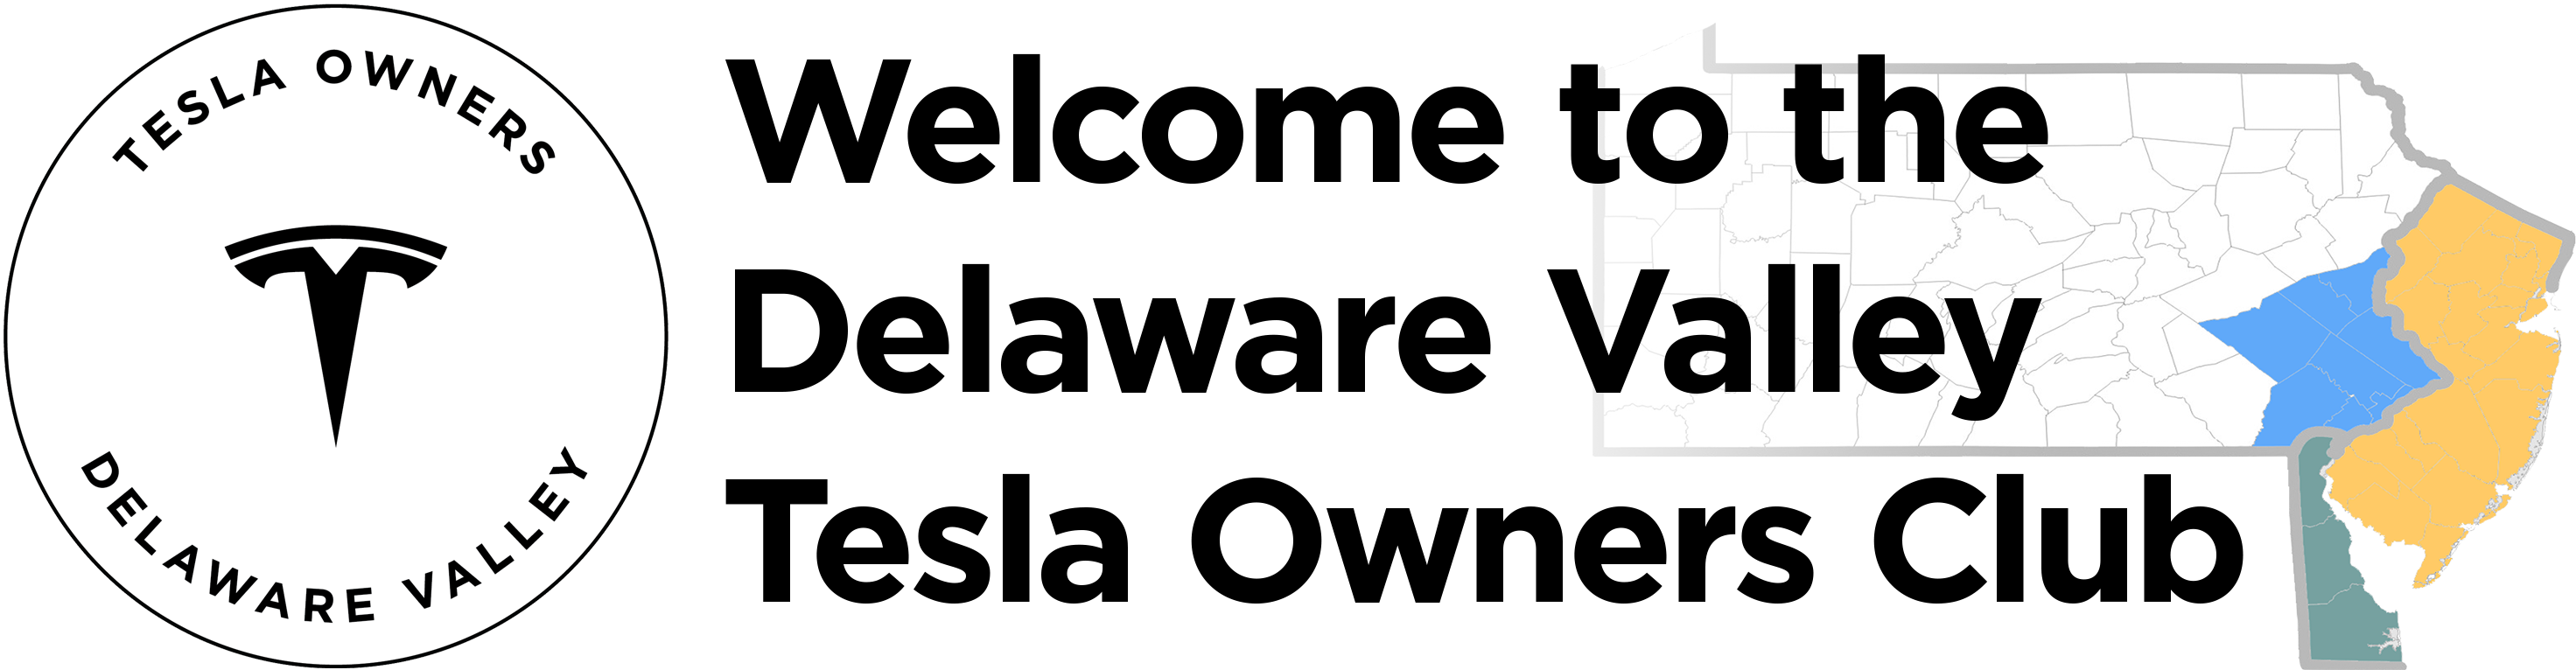 Welcome to the Delaware Valley Tesla Owners Club